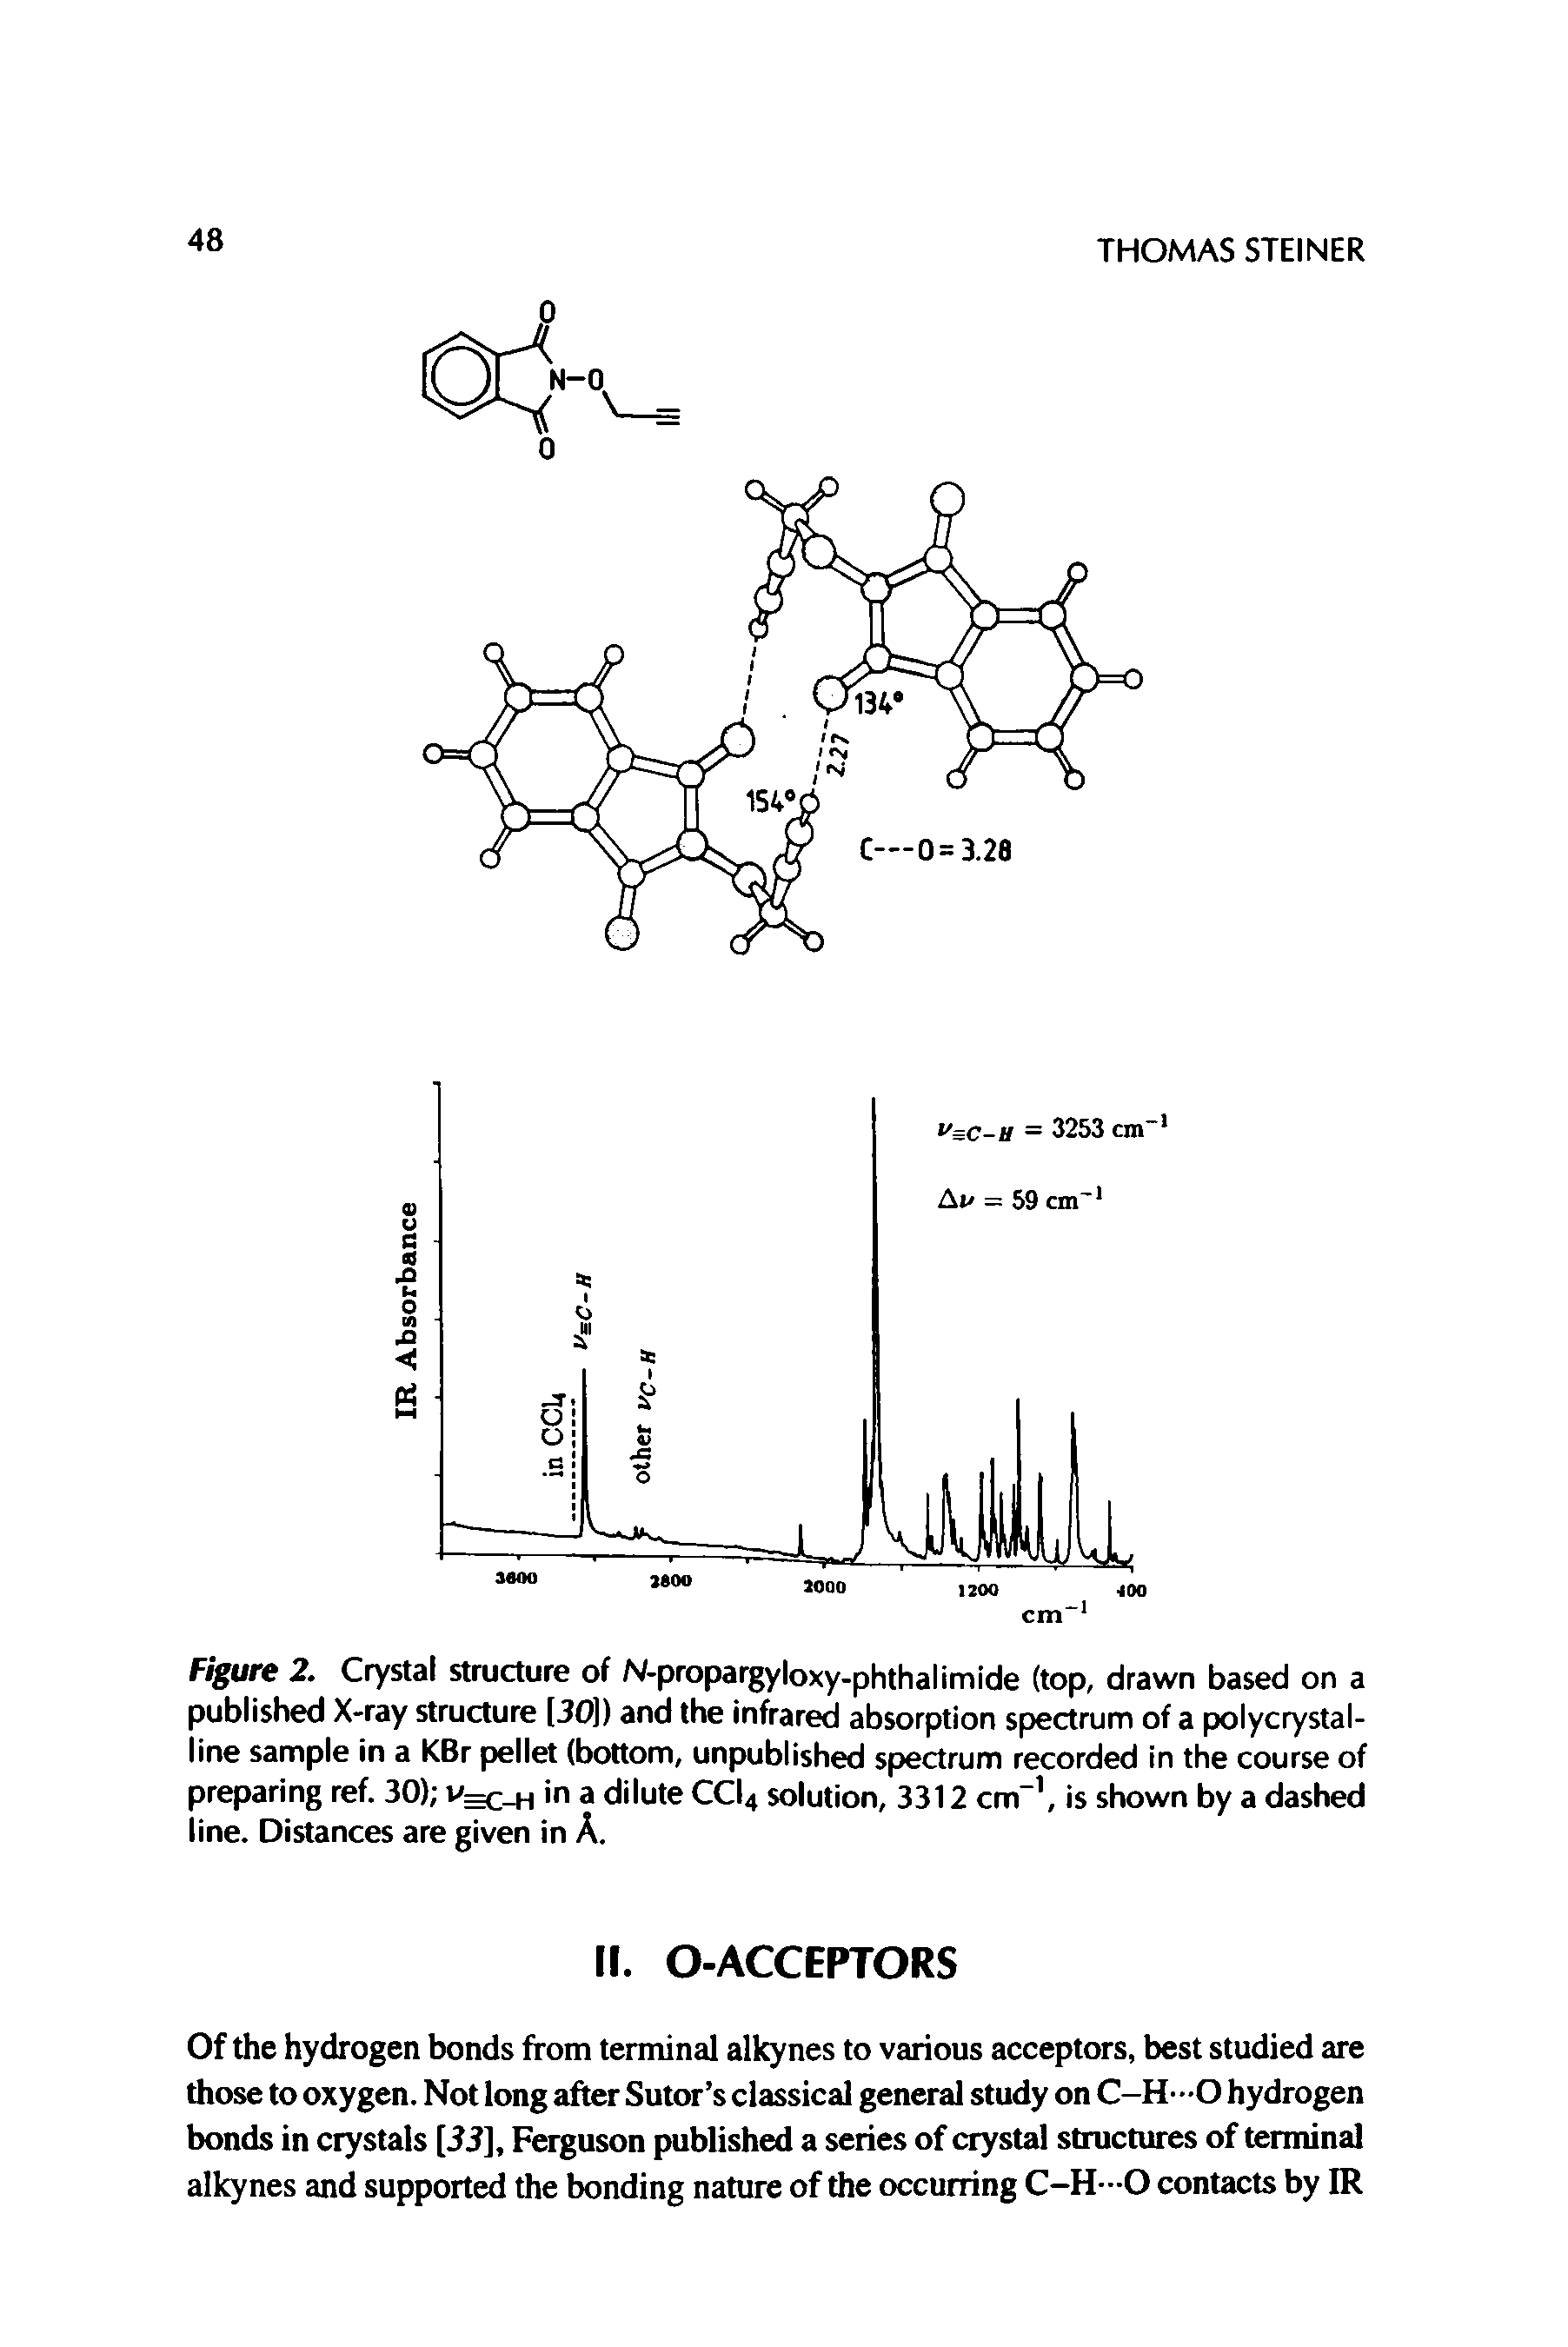 Figure 2. Crystal structure of N-propargyloxy-phthalimide (top, drawn based on a published X-ray structure [30]) and the infrared absorption spectrum of a polycrystalline sample in a KBr pellet (bottom, unpublished spectrum recorded in the course of preparing ref. 30) v h in a dilute CCI4 solution, 3312 cm , is shown by a dashed line. Distances are given in A.